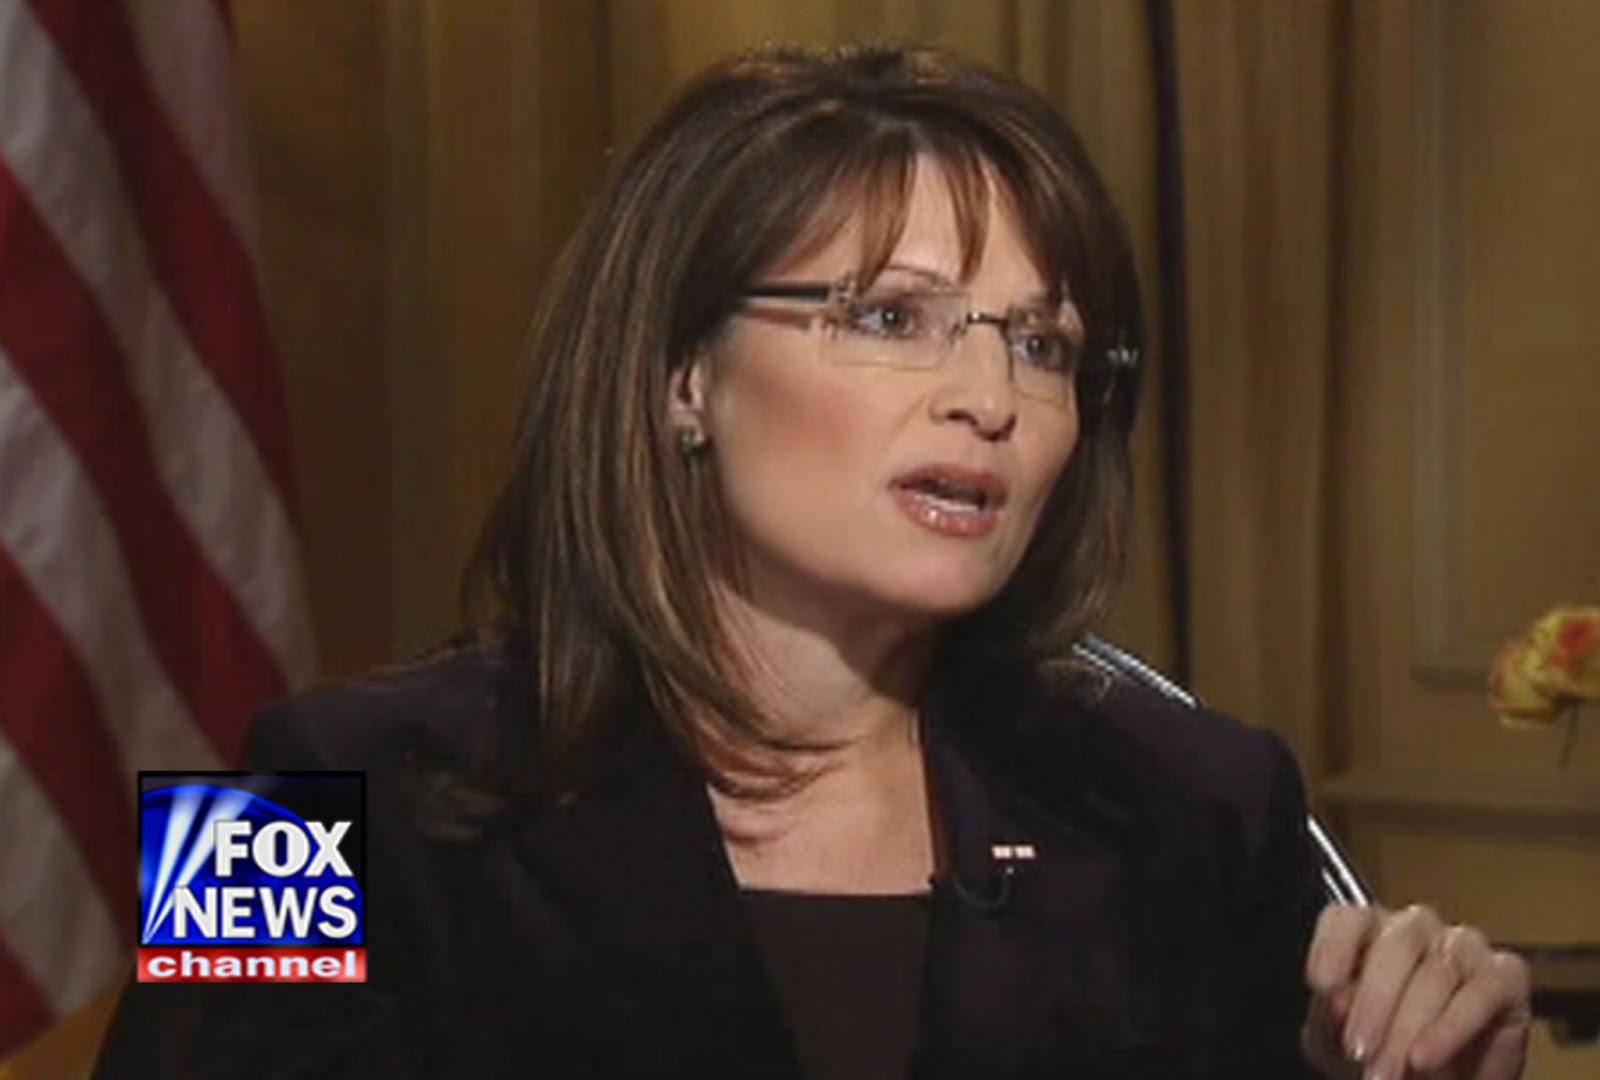 Women State: Palin and Fox News No more1600 x 1080